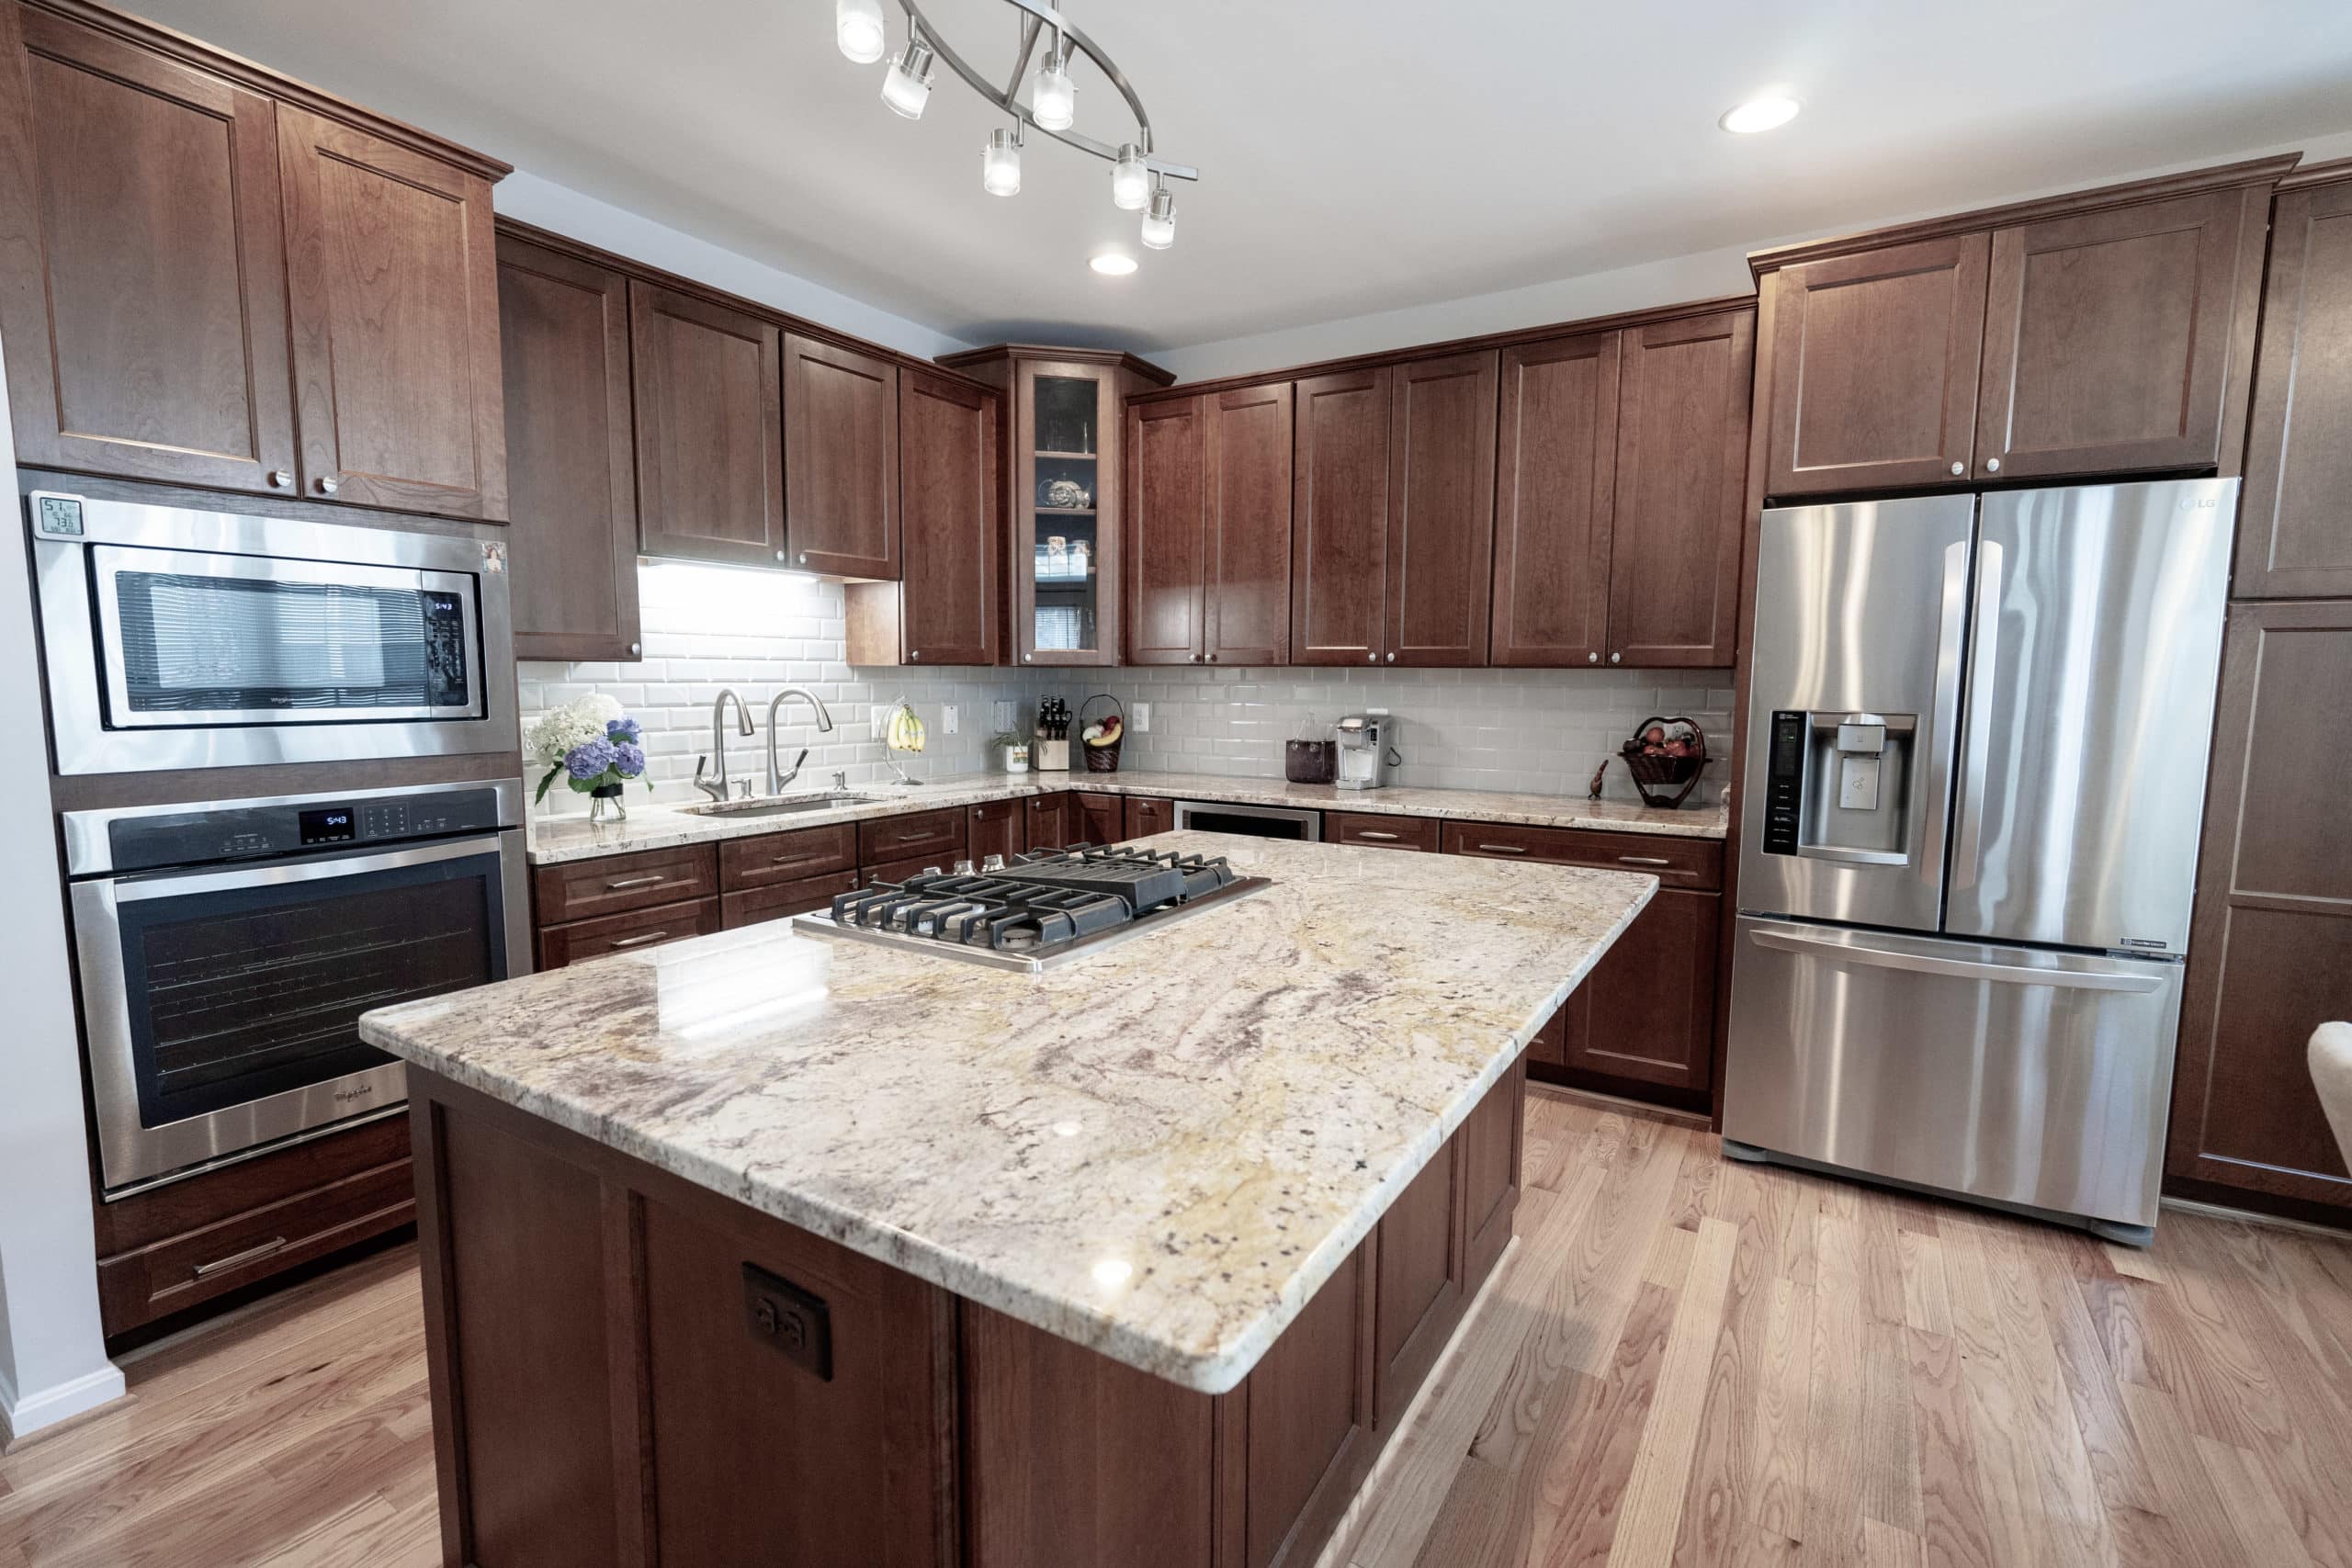  Kitchen  Remodeling in Fairfax VA Bath Remodeling USA  